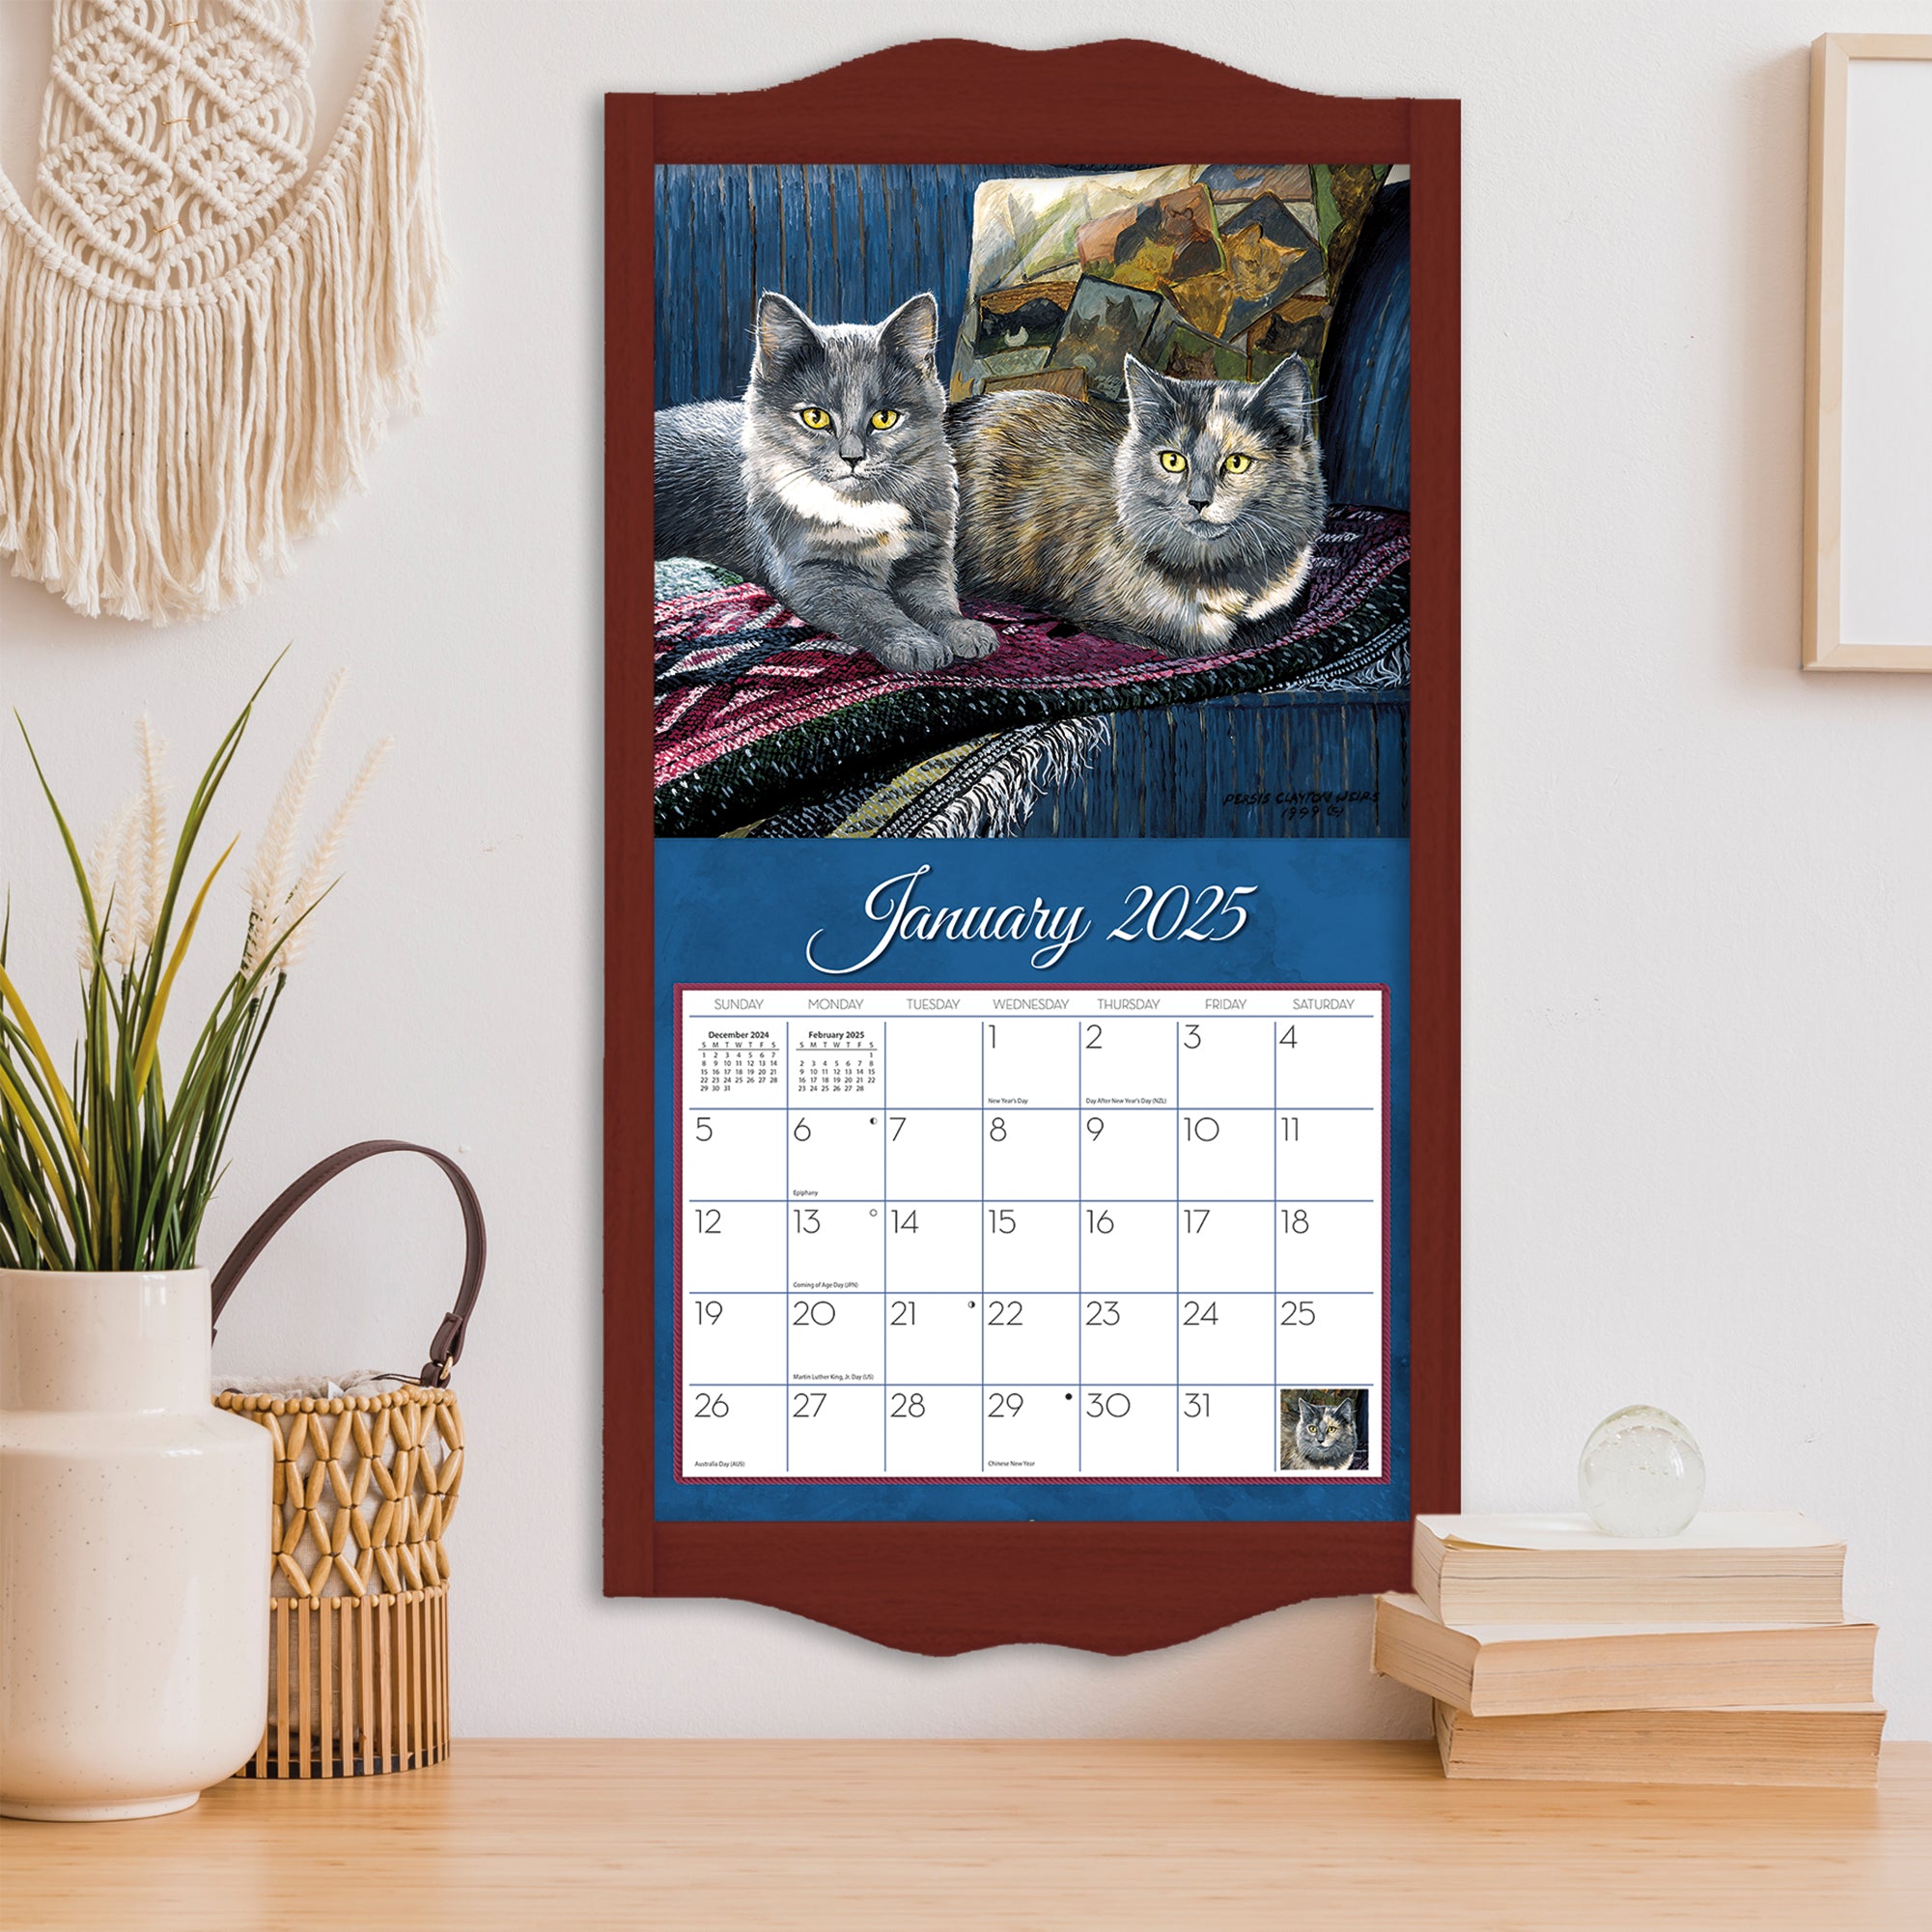 2025 LANG Love Of Cats By Persis Clayton Weirs - Deluxe Wall Calendar